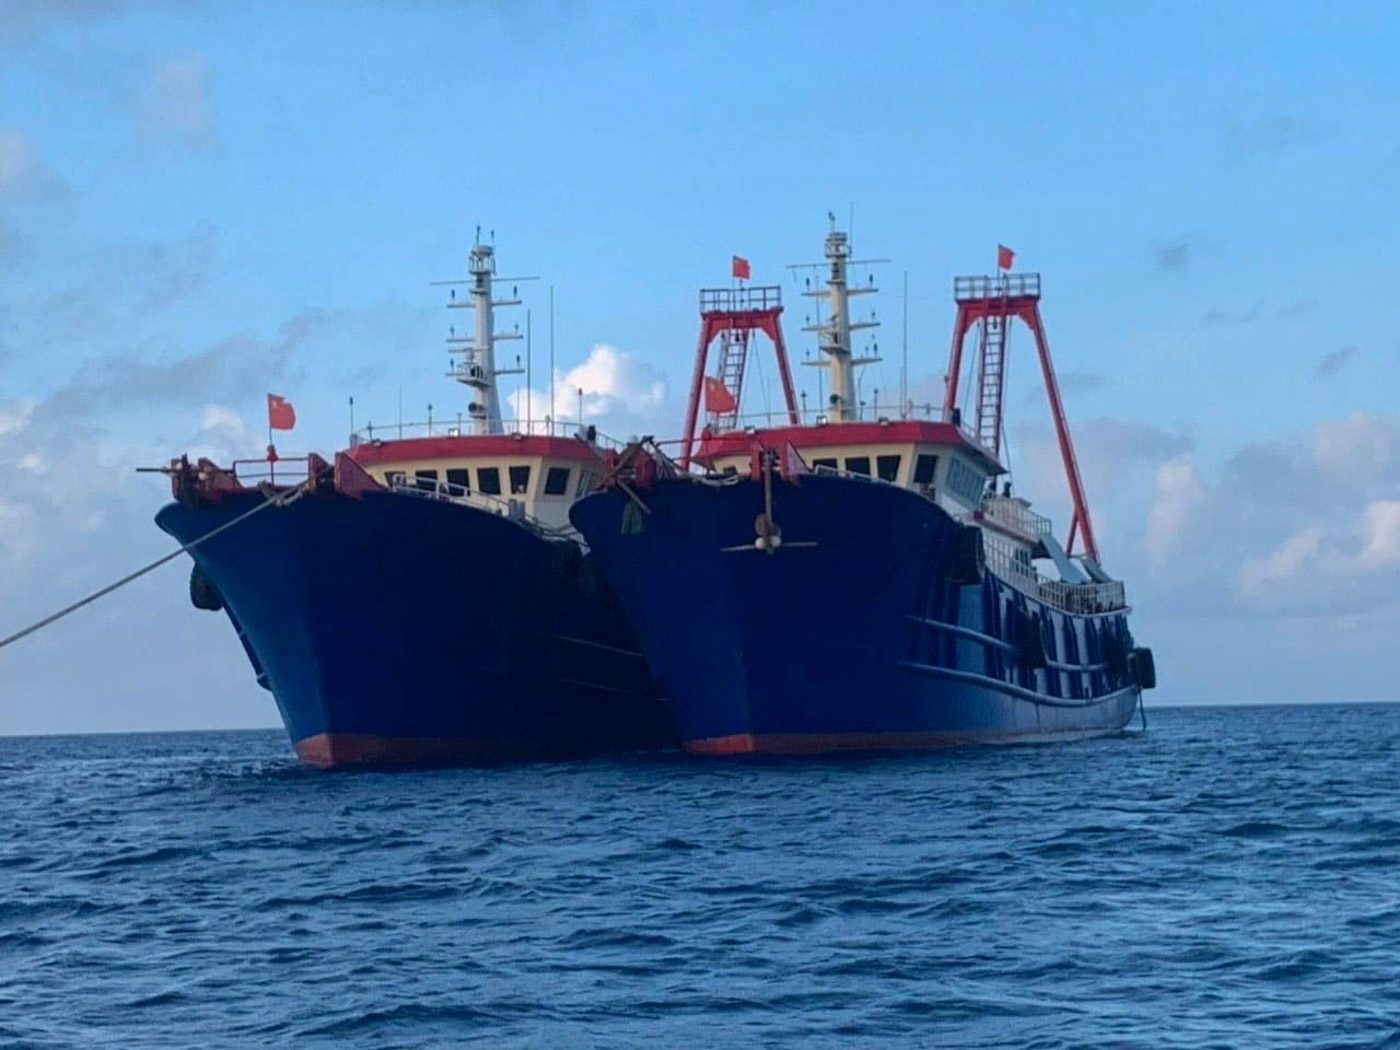 Chinese ship to Filipino aircraft in West PH Sea: ‘Leave immediately, keep out’